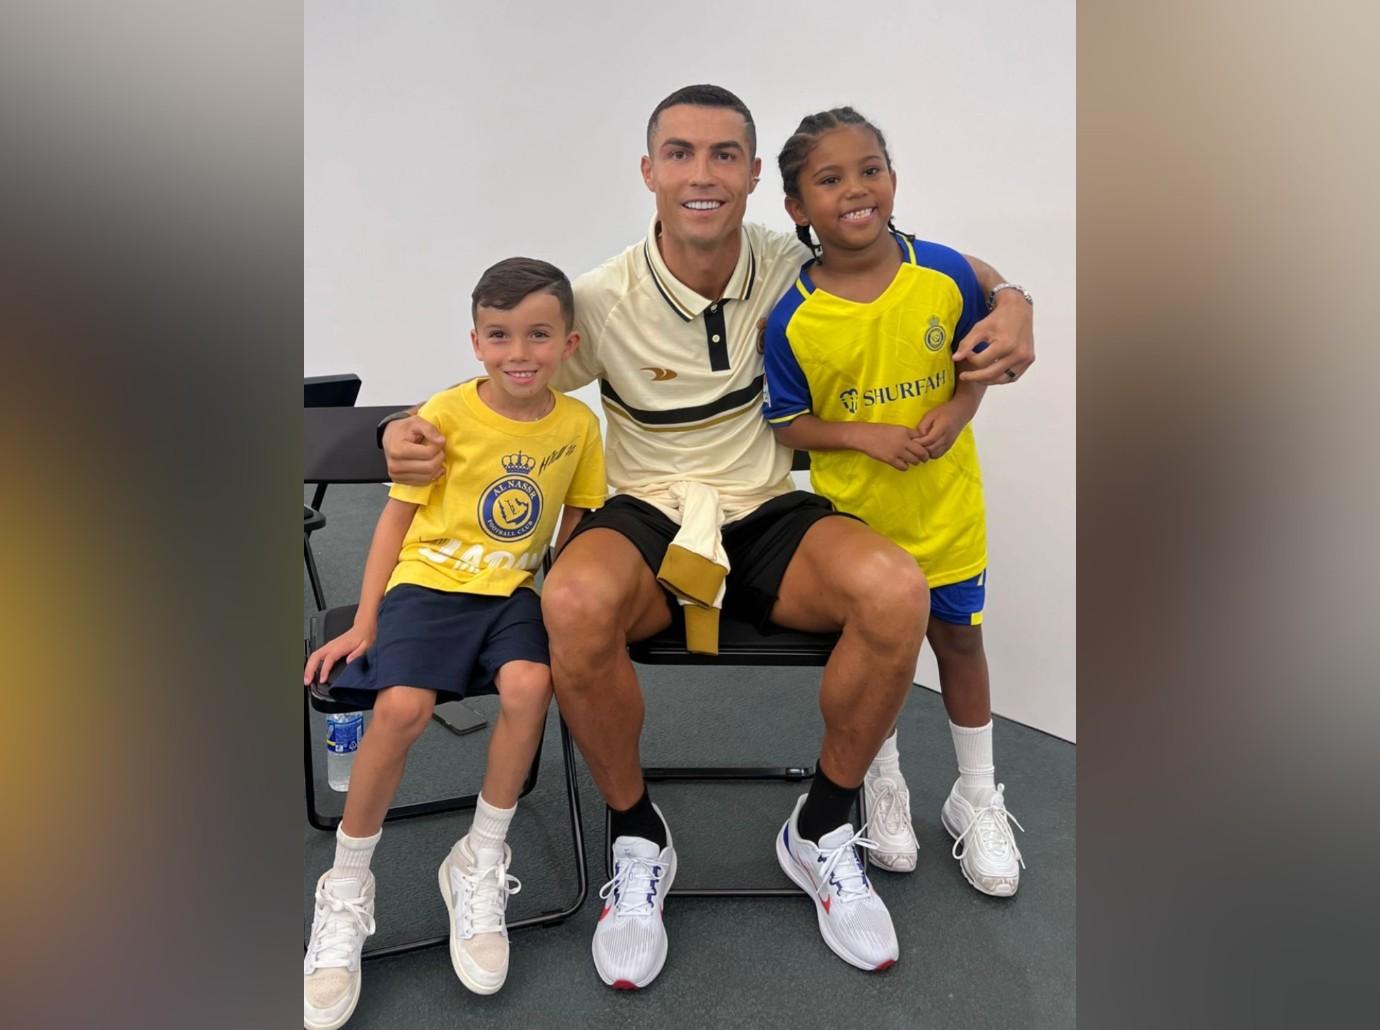 This Little Girl Celebrates Just Like Cristiano Ronaldo and the Internet  Can't Stop Gushing